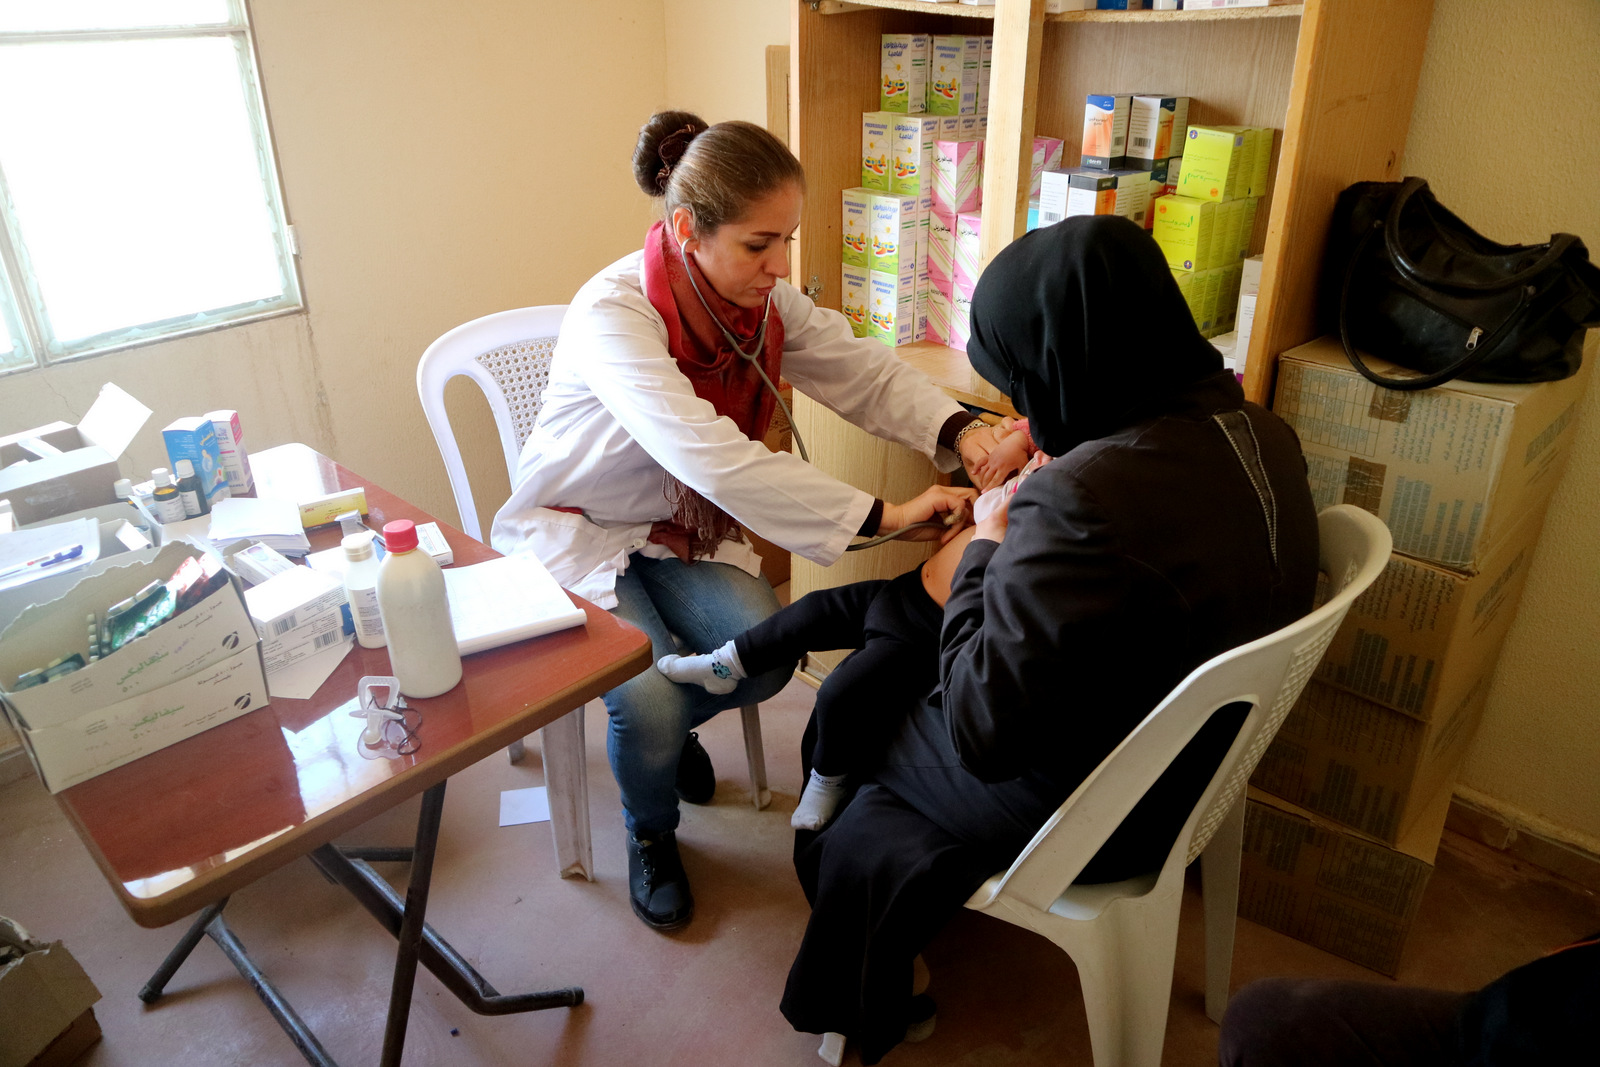 Dr. Jamilah al-Naemah treats a child sick with the flu at a medical center in al-Harjallah, Eastern Ghouta. (Photo: © Bas Spliet)